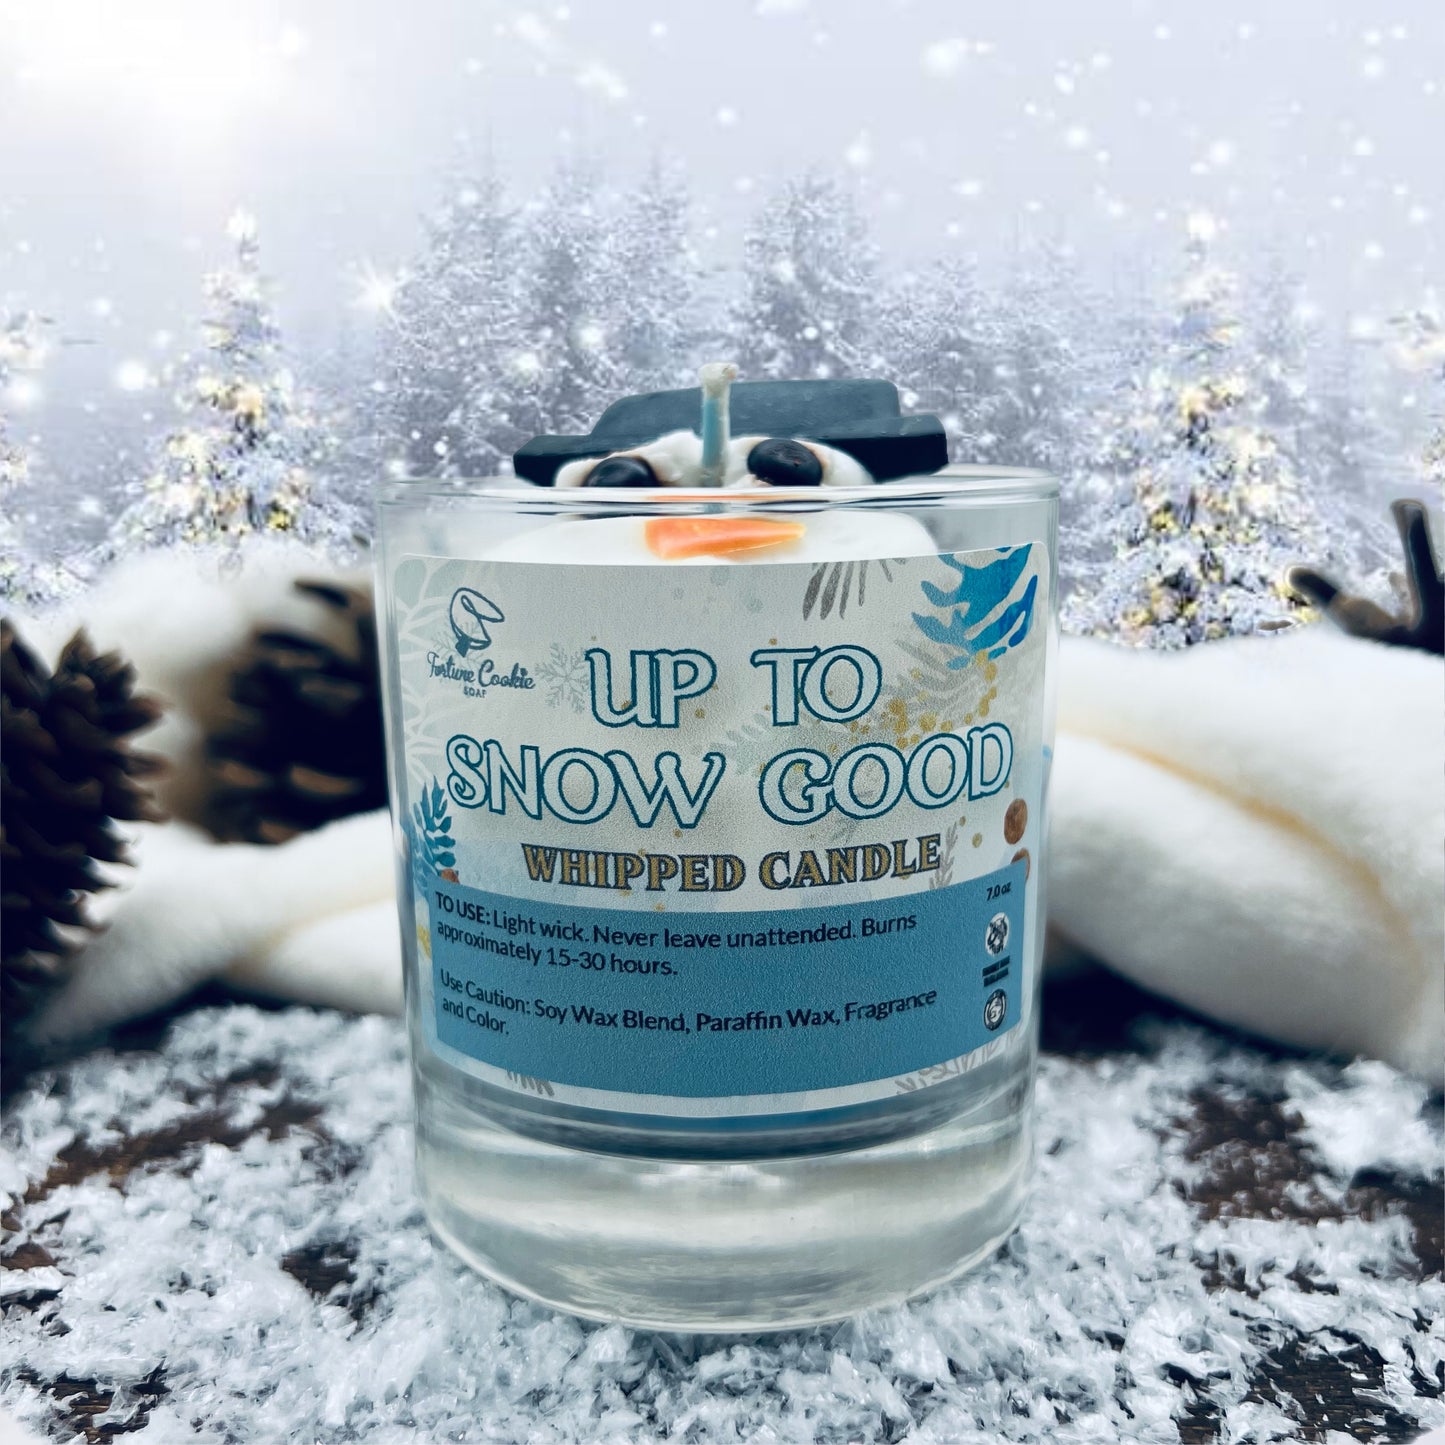 UP TO SNOW GOOD Whipped Candle